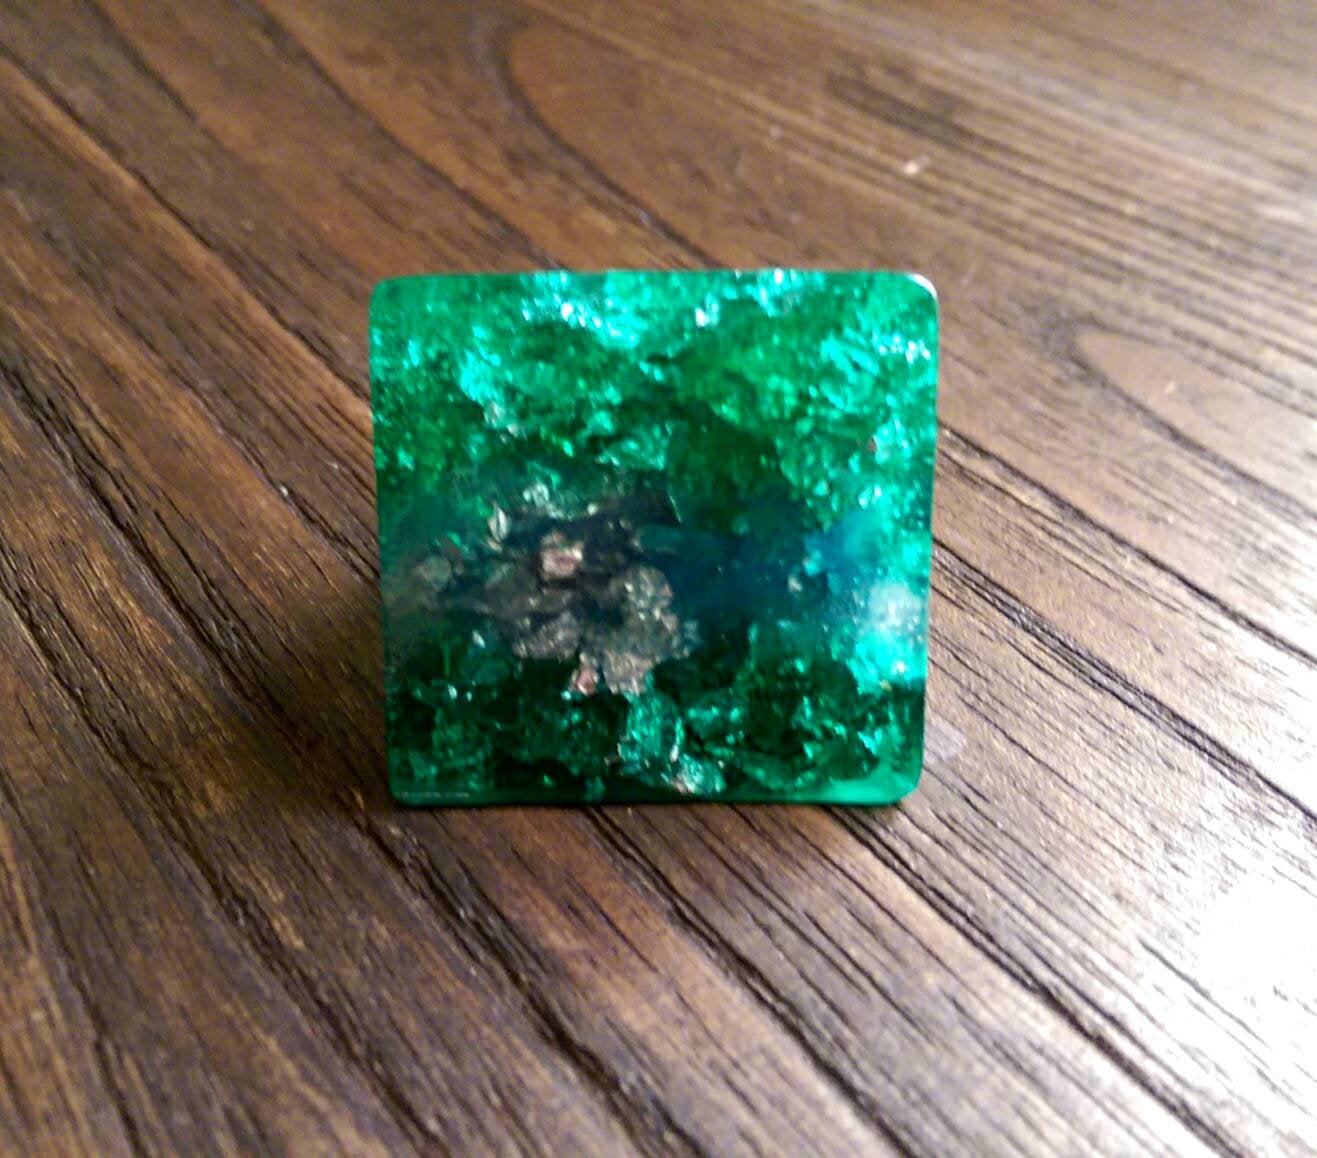 Statement Square Resin Ring, Handmade Size 7 US N AU. Green Blue Silver Leaf Ring